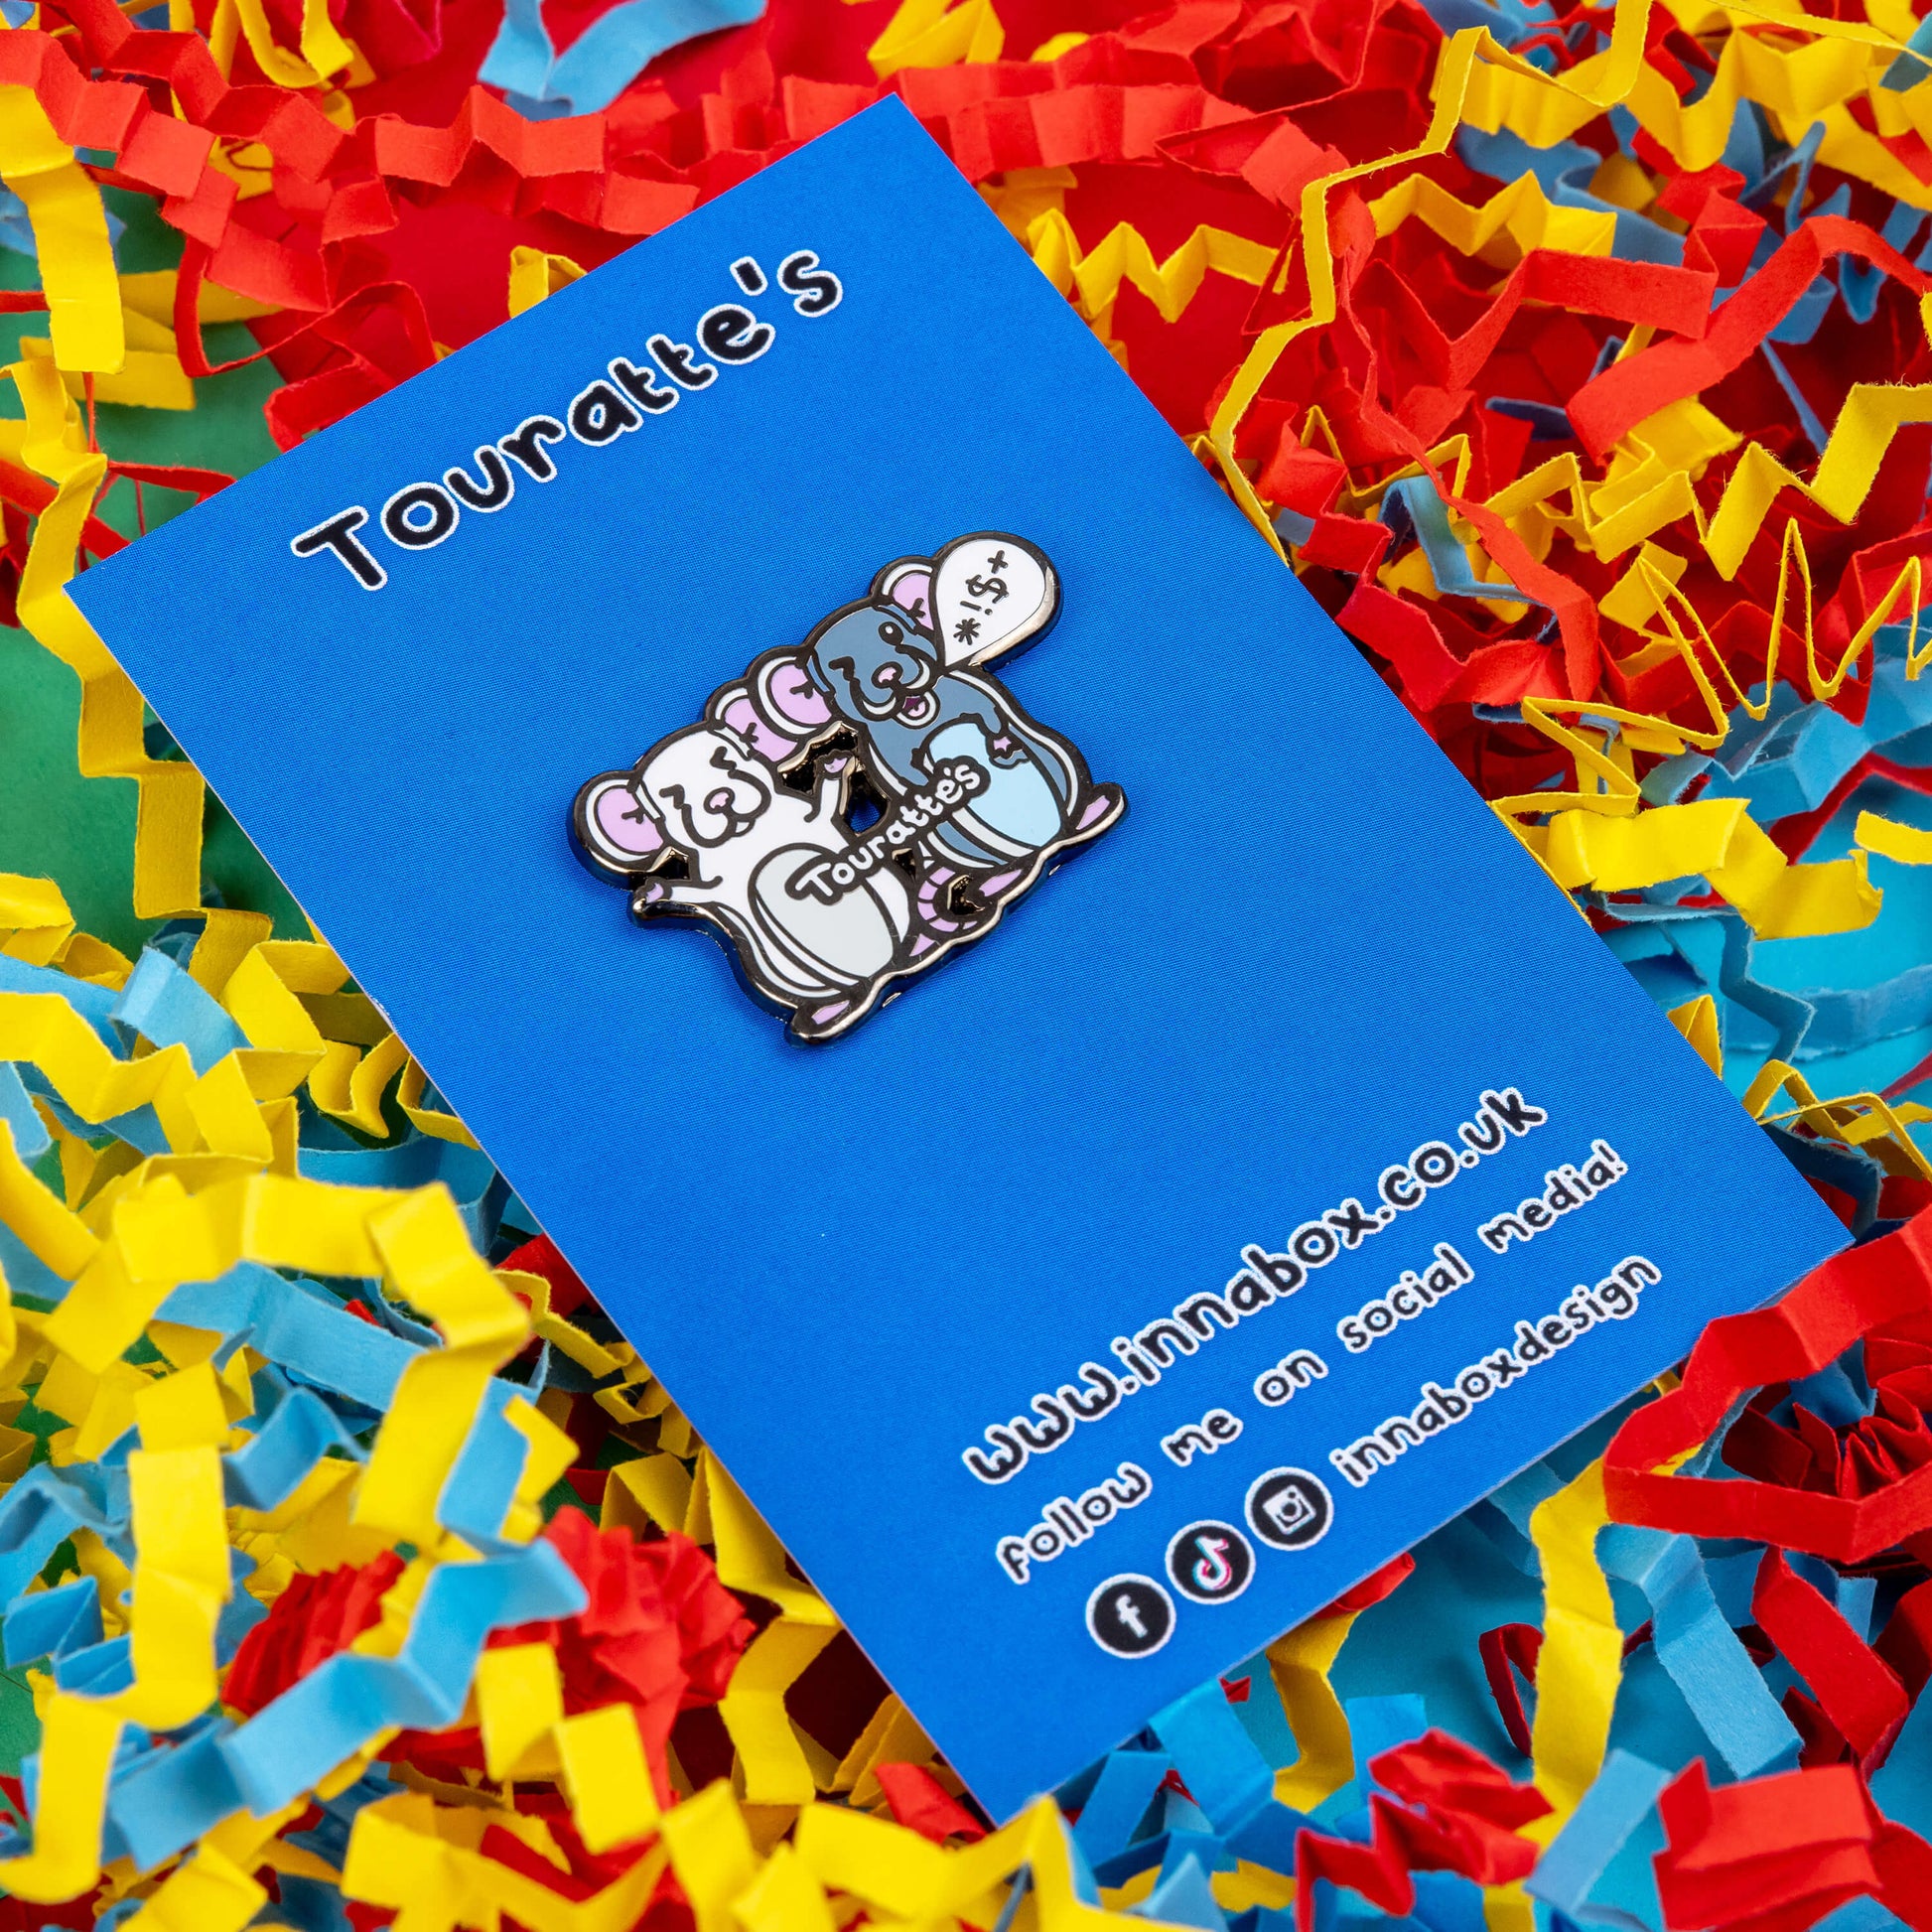 The Touratte's Rat Enamel Pin - Tourette's Syndrome on blue backing card laying on a red, blue and yellow paper background. The enamel pin is of two rats with pink ears and feet, the white rat on the left is raising its arms with its eyes closed and the grey rat on the right has a speech bubble with symbols in, across both rats reads 'touratte's'. The hand drawn design is raising awareness for tics and tourettes.